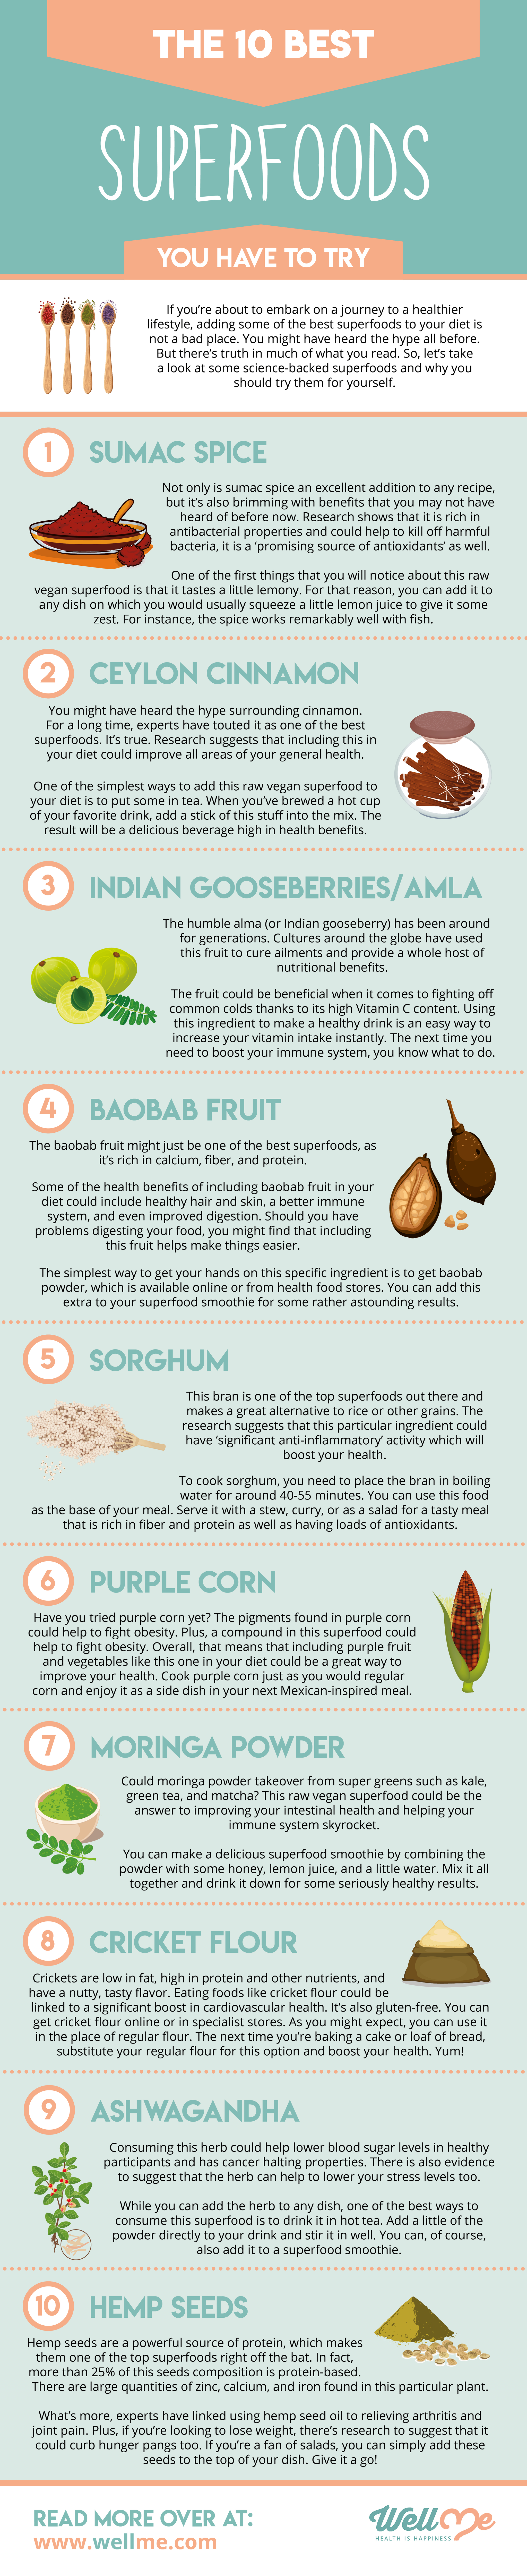 10 best superfoods infographic